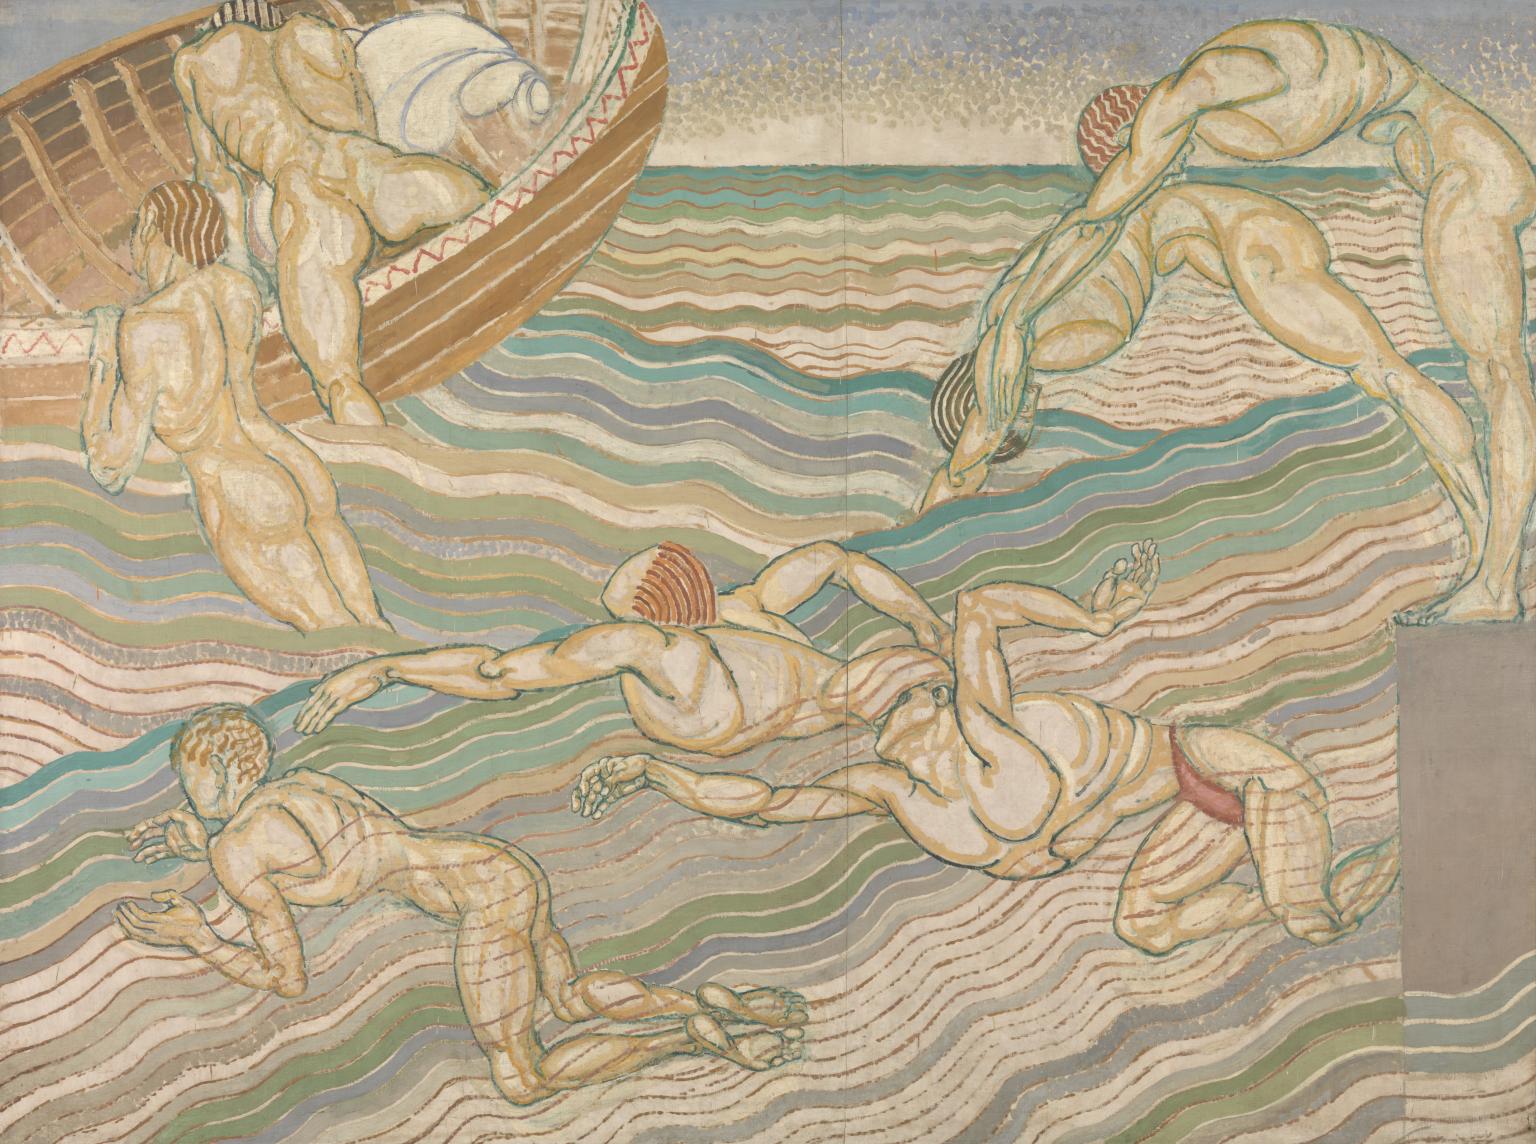 Painting of men bathing on the right with men climbing into a boat on the left.